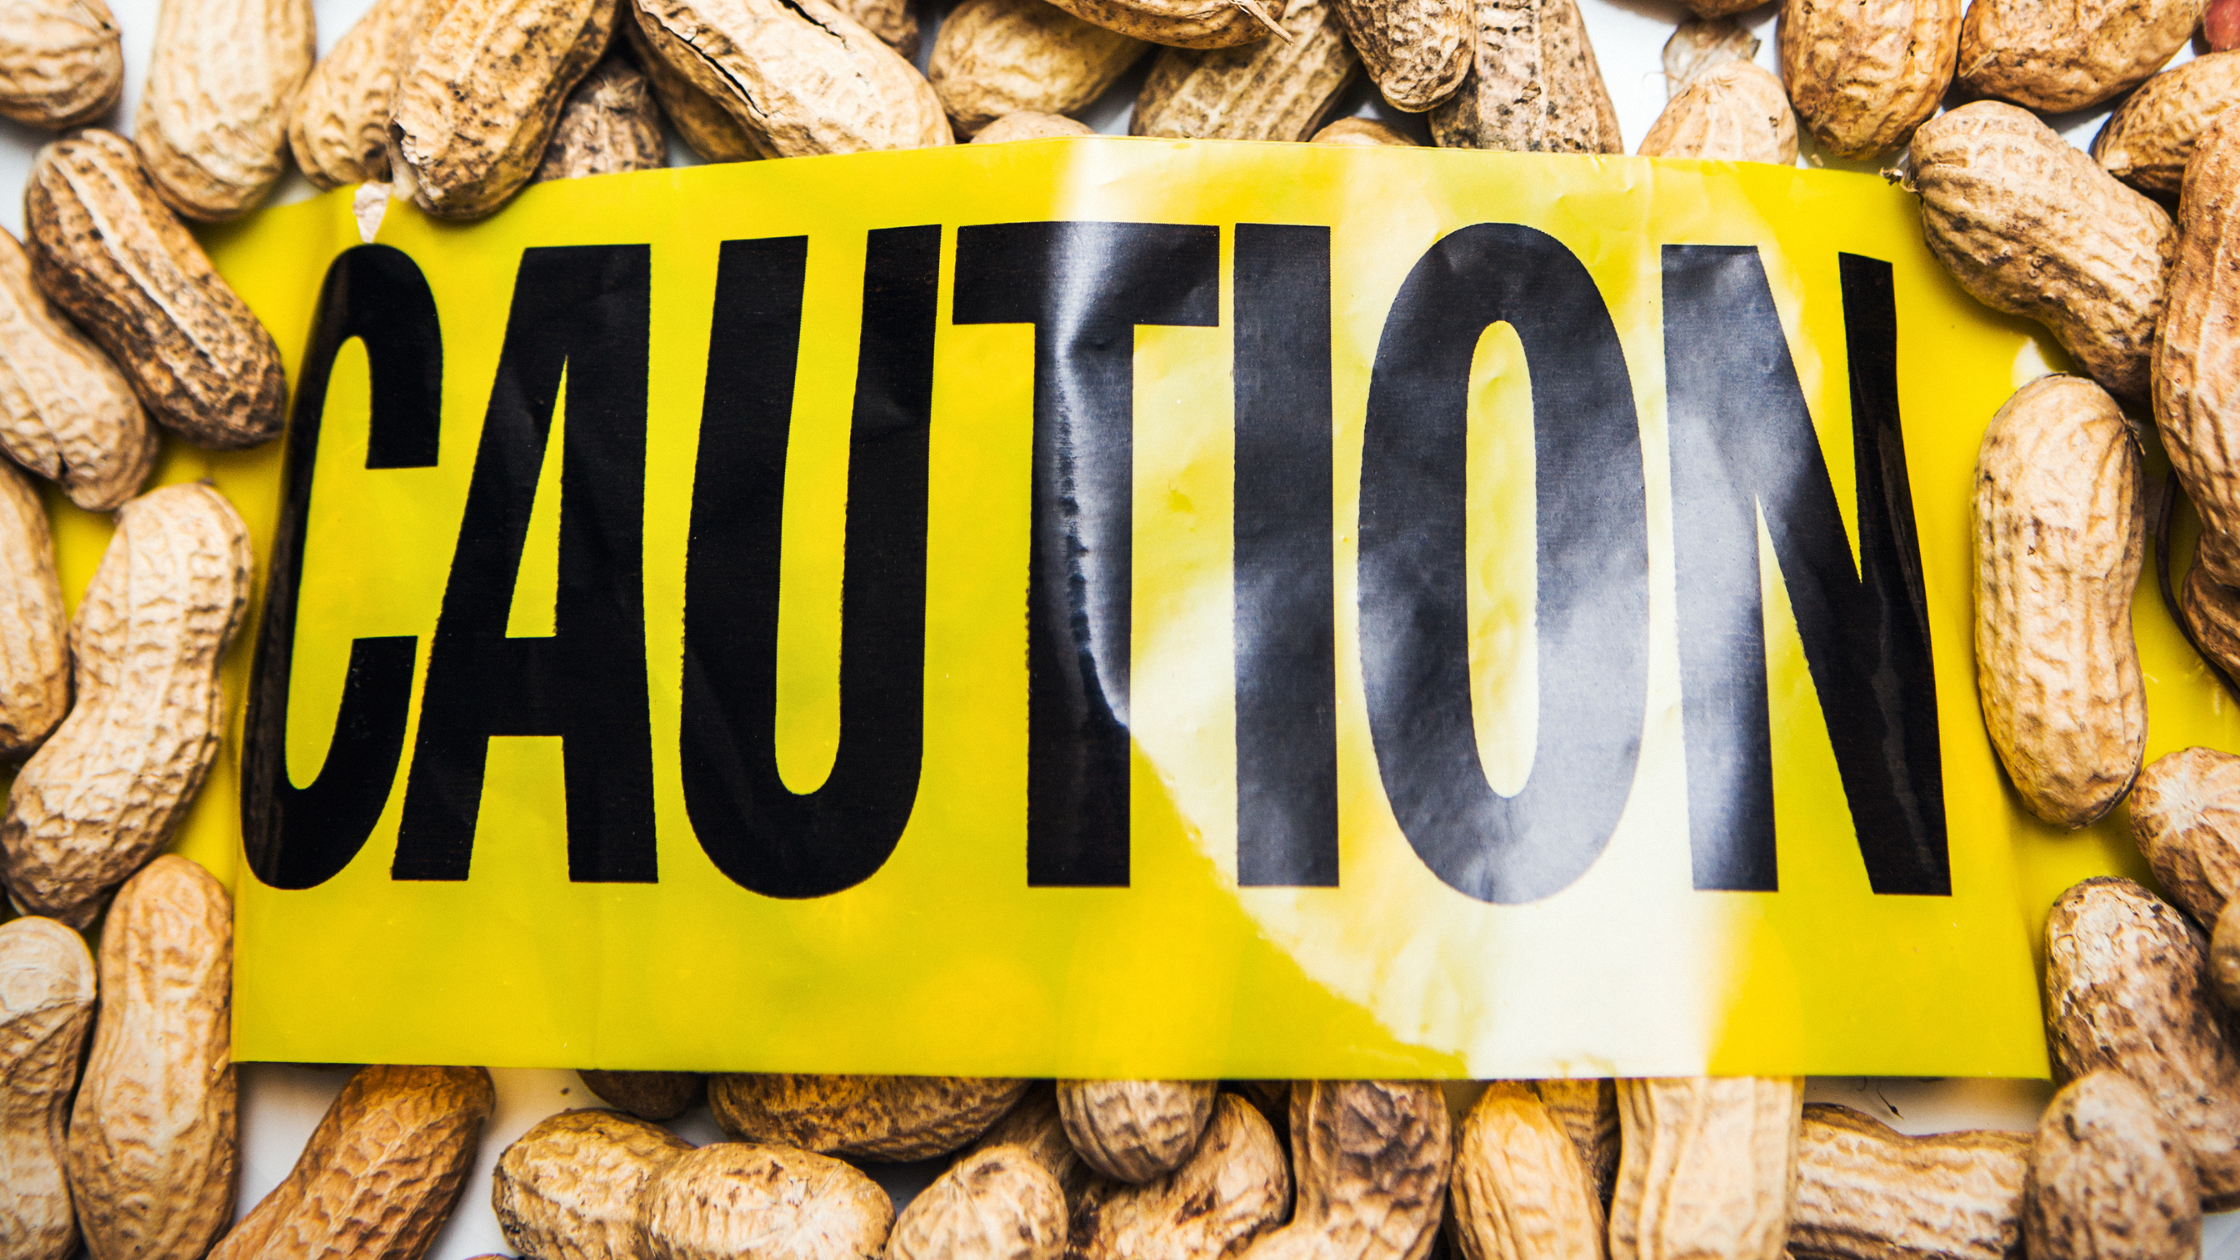 Introduction to Peanut Allergies: A Critical Health Concern